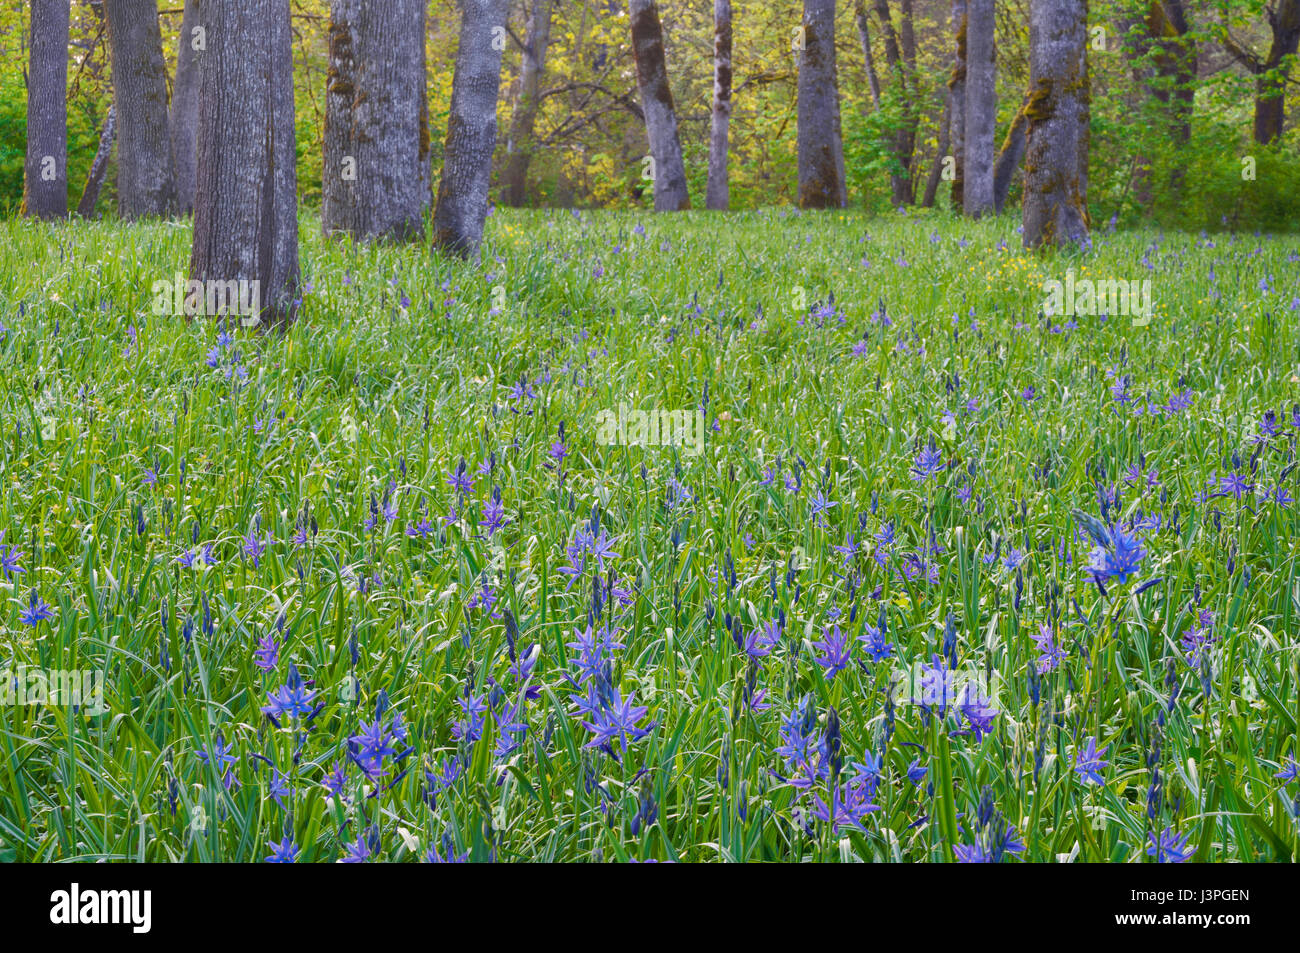 Lush meadow of blue camas wildflowers with oak trees in background Stock Photo